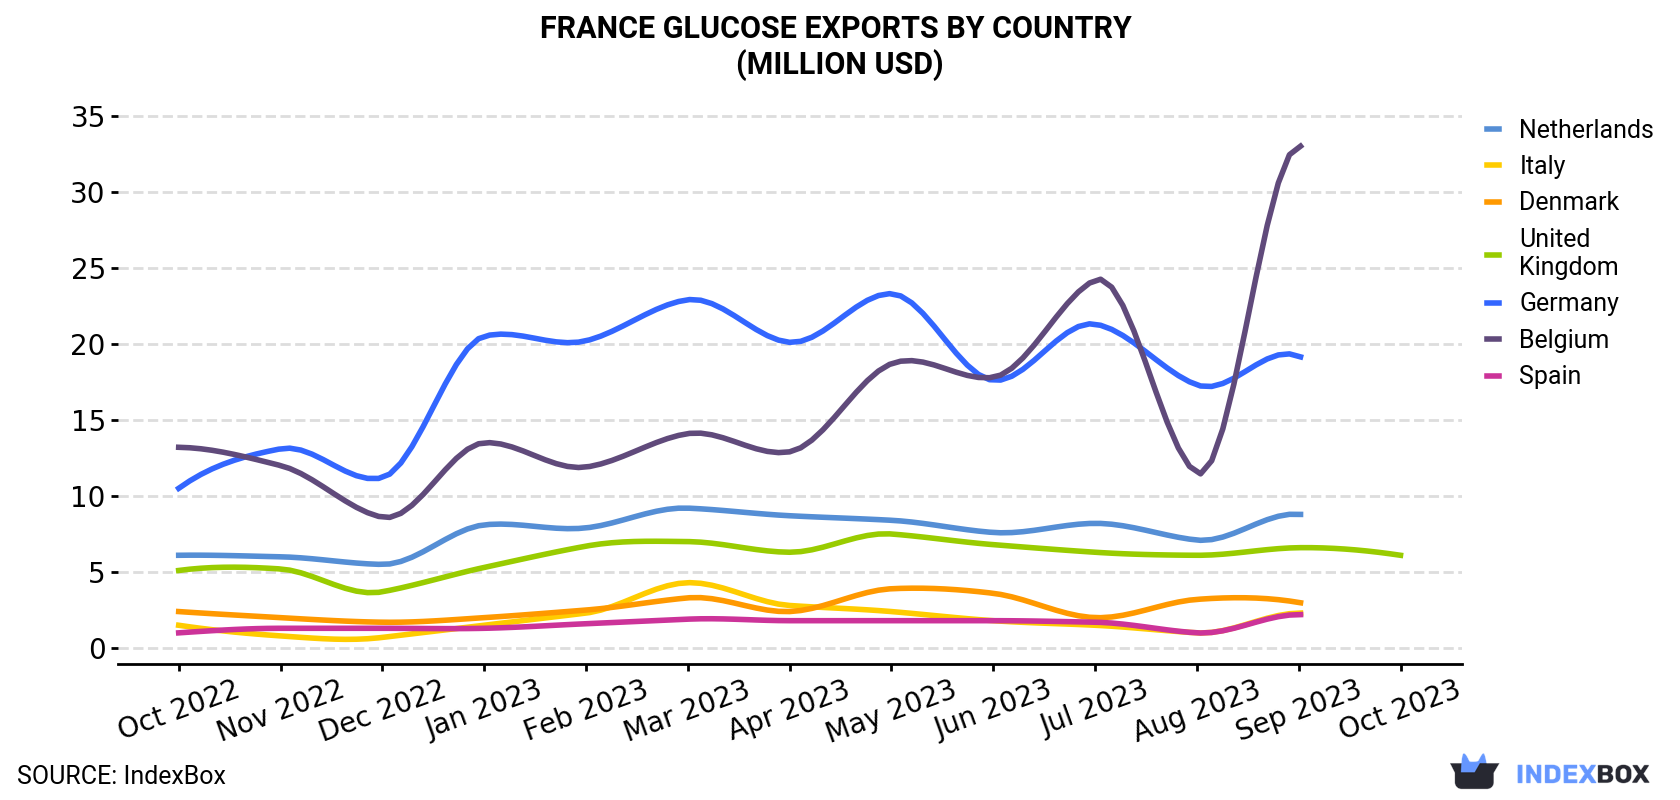 France Glucose Exports By Country (Million USD)